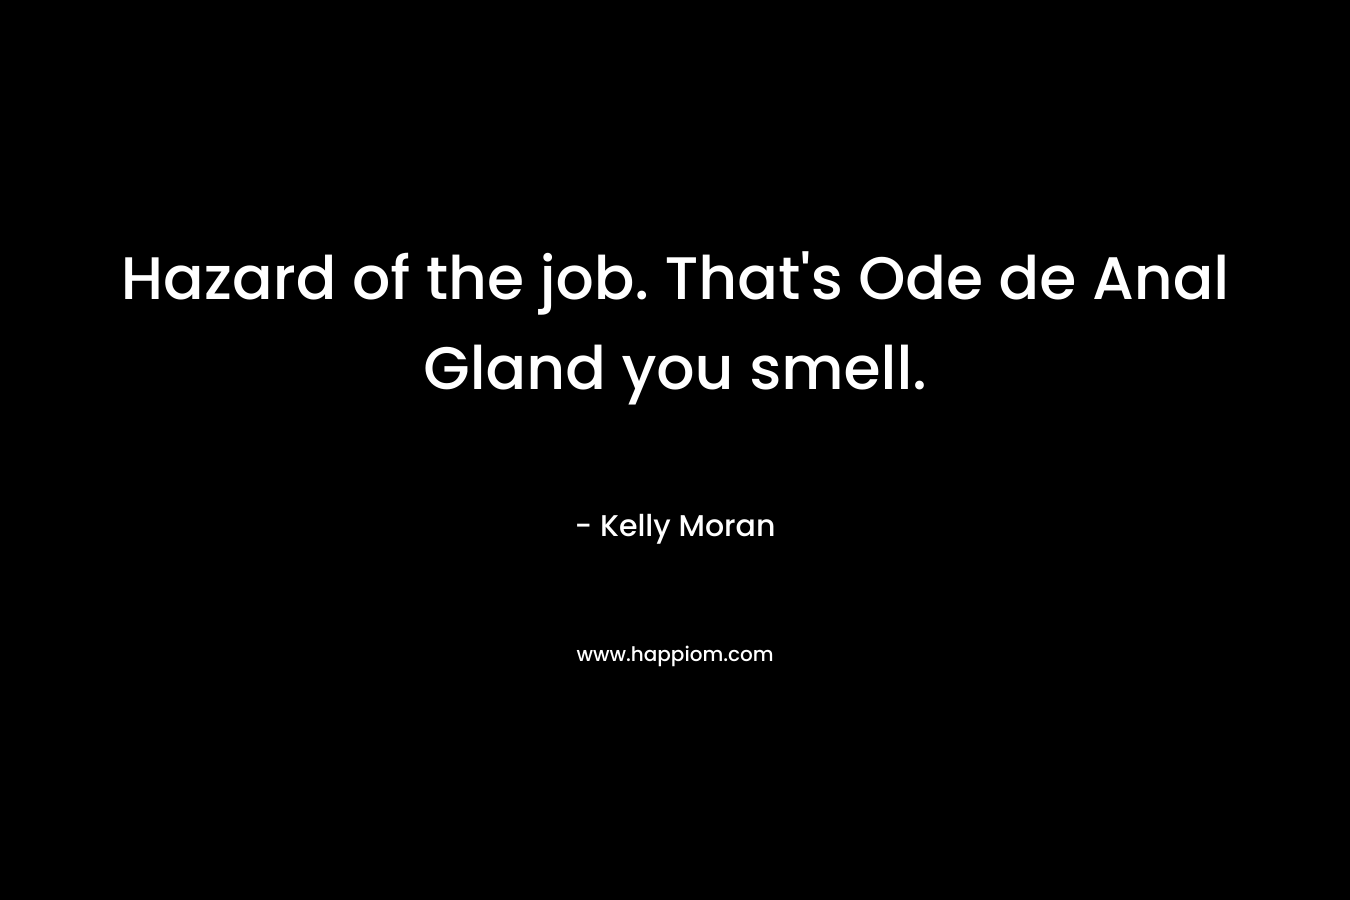 Hazard of the job. That’s Ode de Anal Gland you smell. – Kelly Moran